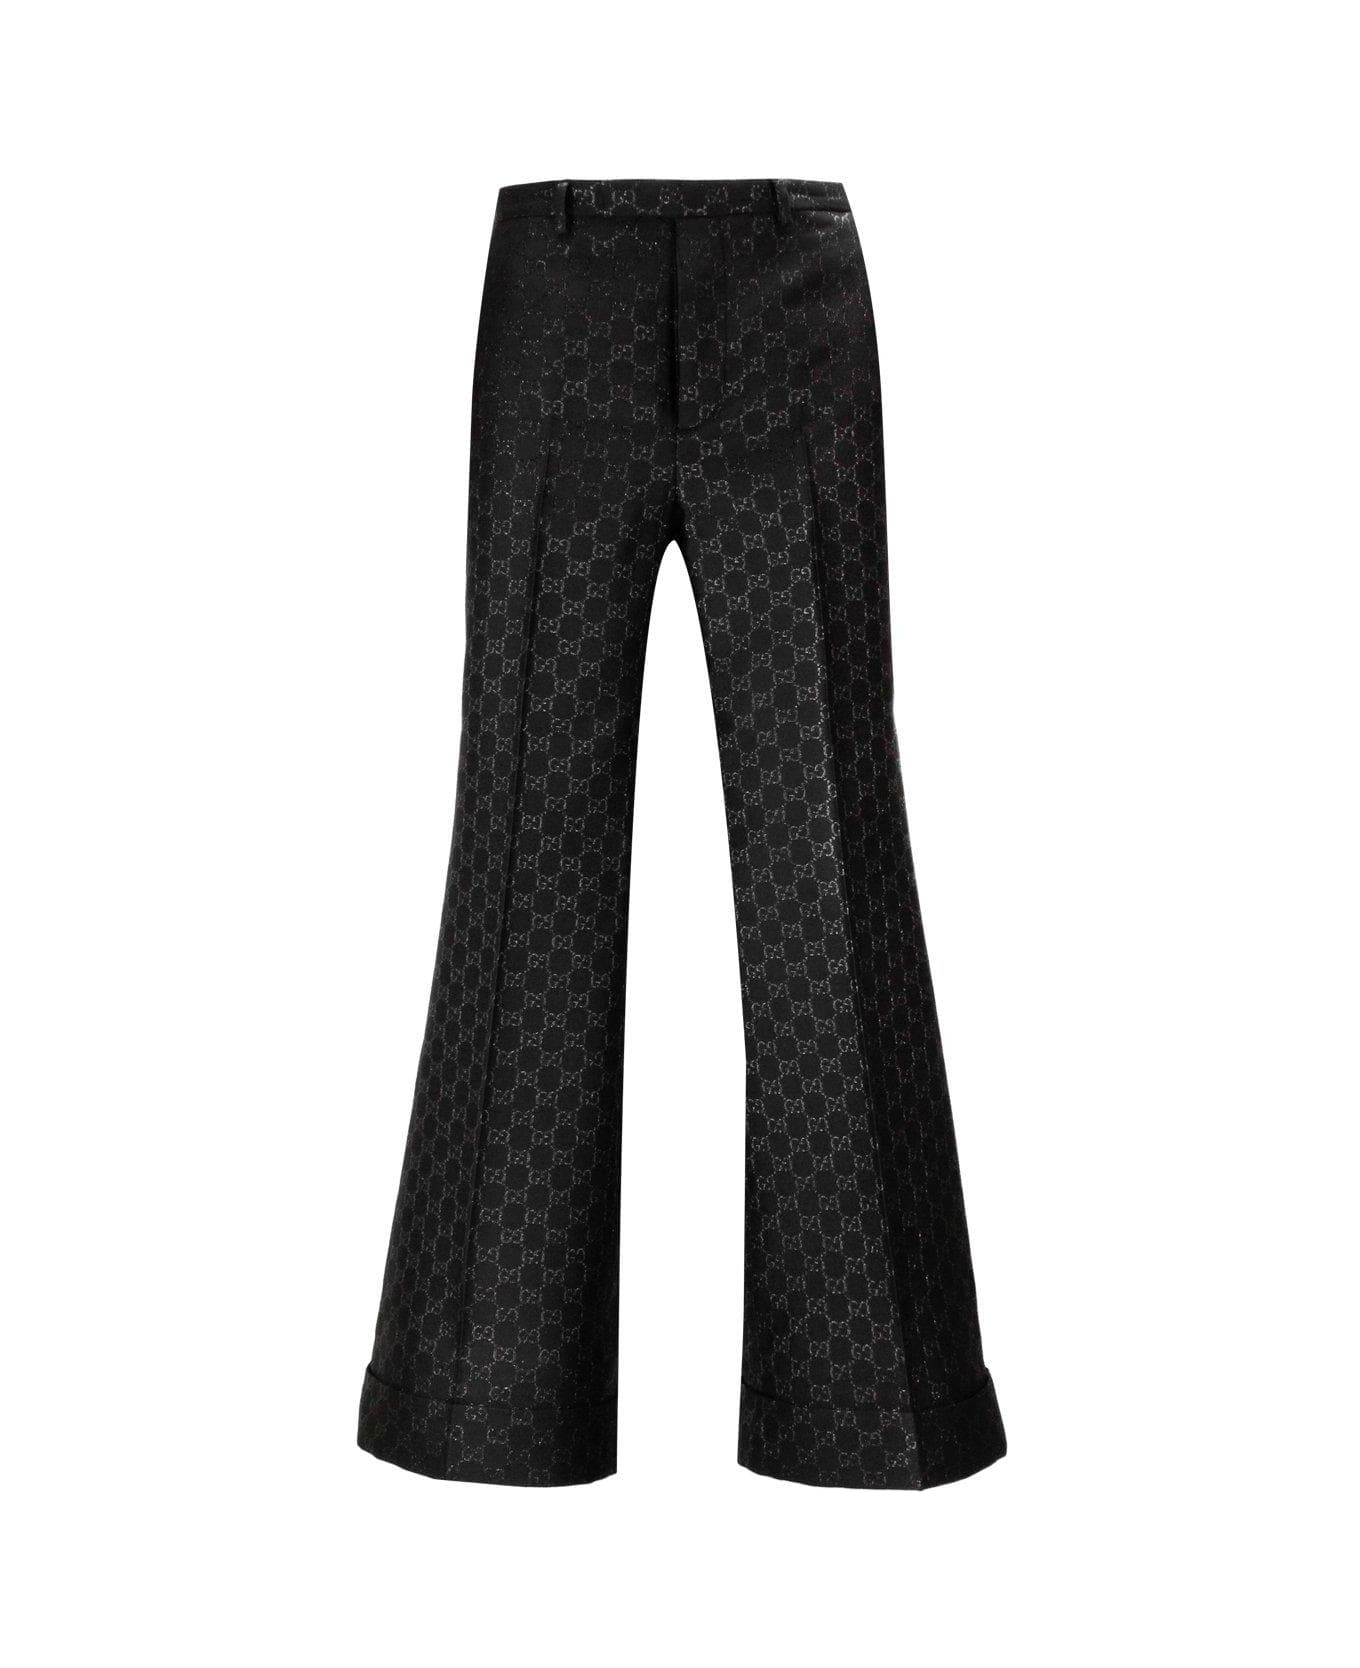 Gucci Gg Slim Fit Trousers - Black ボトムス